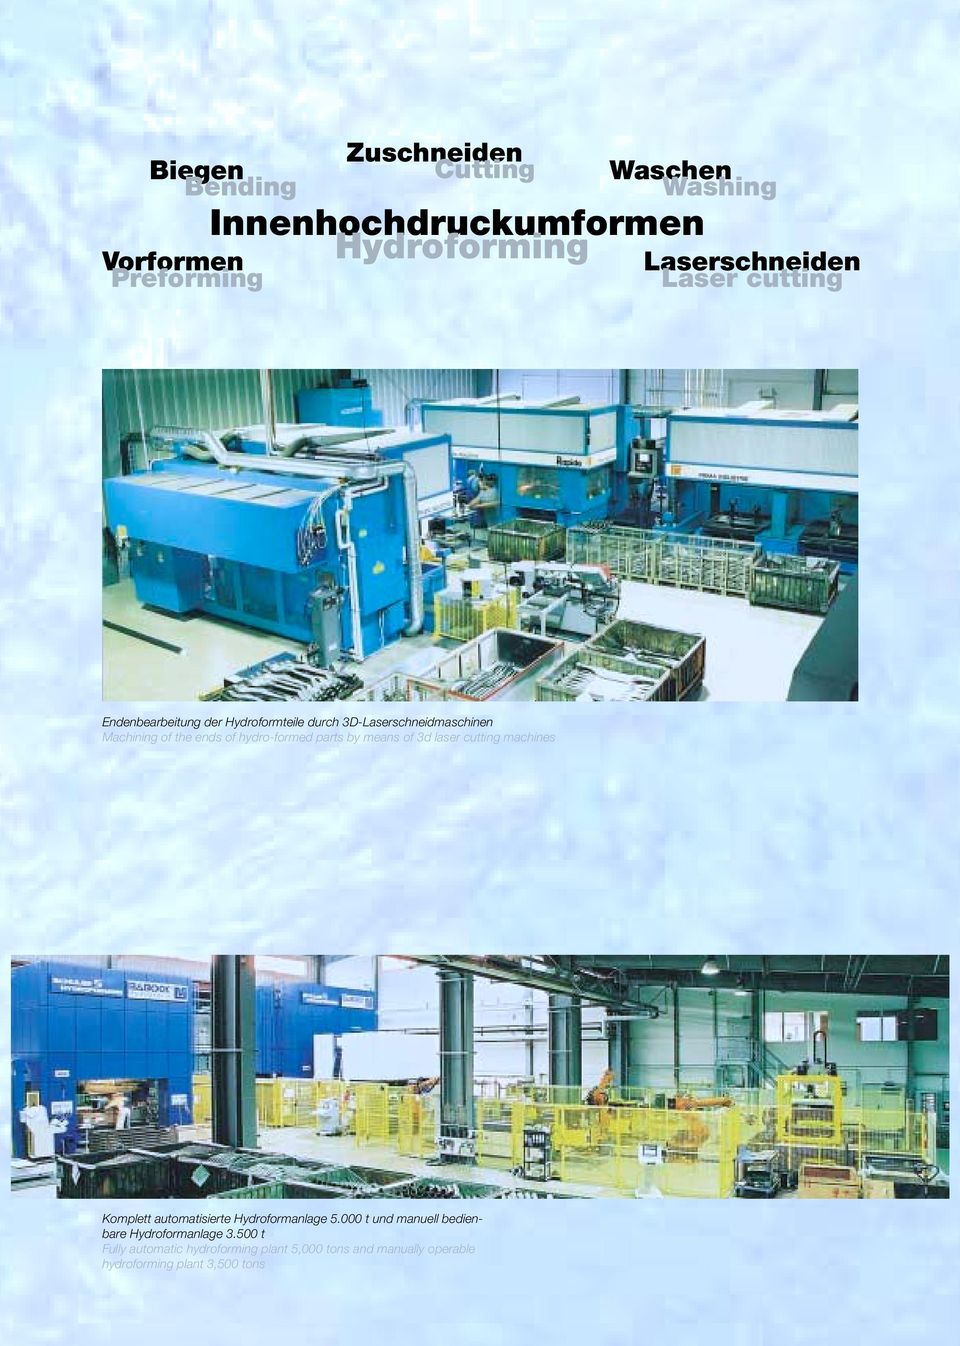 of hydro-formed parts by means of 3d laser cutting machines Komplett automatisierte Hydroformanlage 5.